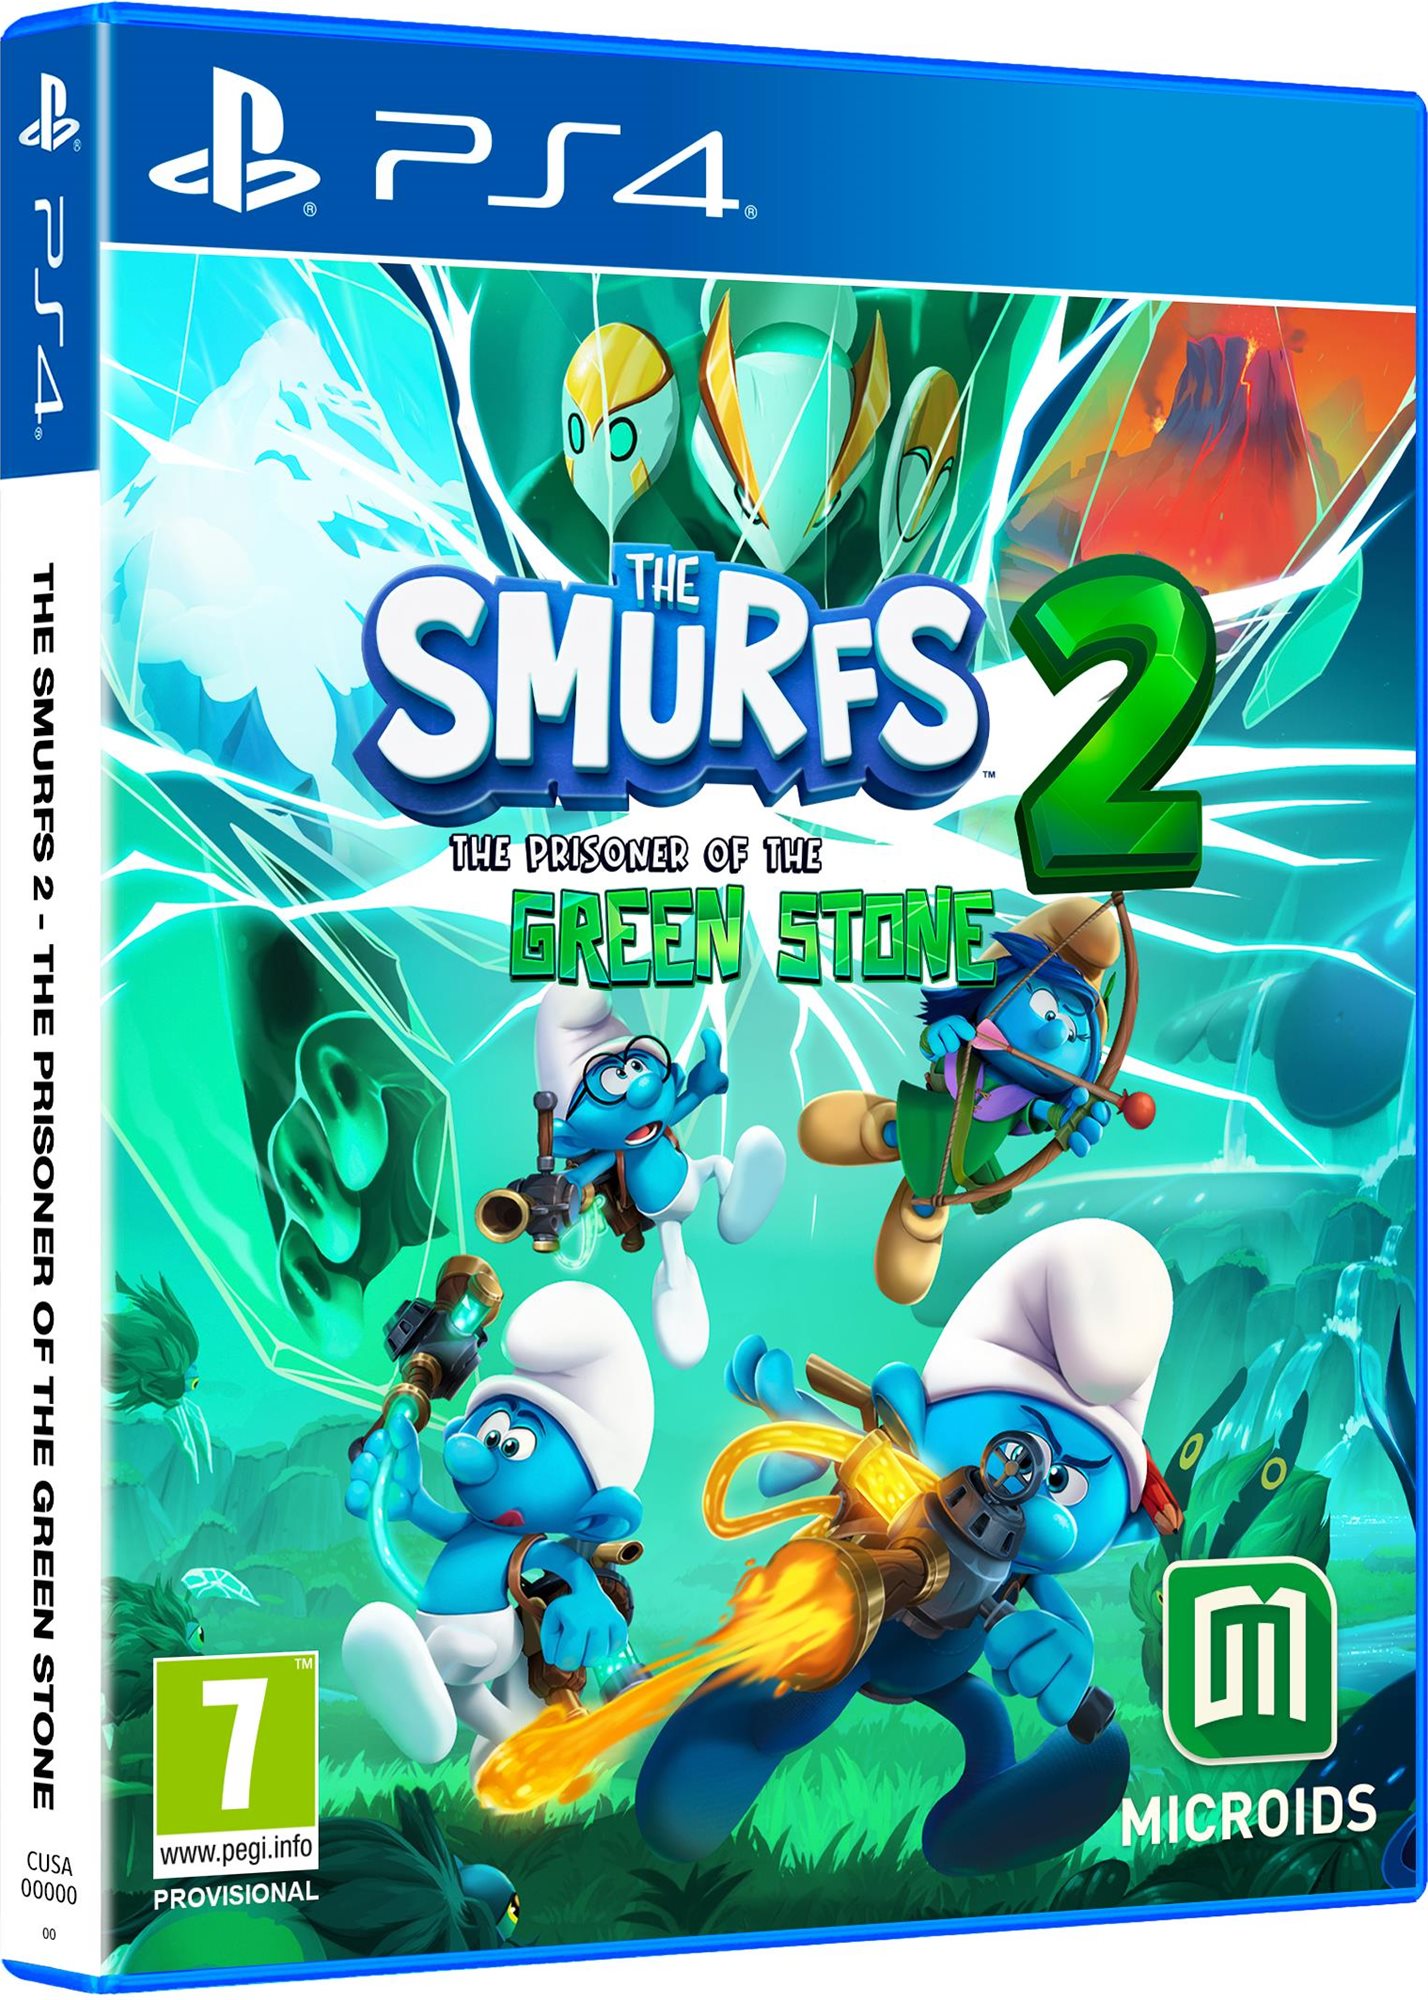 The Smurfs 2: The Prisoner of the Green Stone - PS4